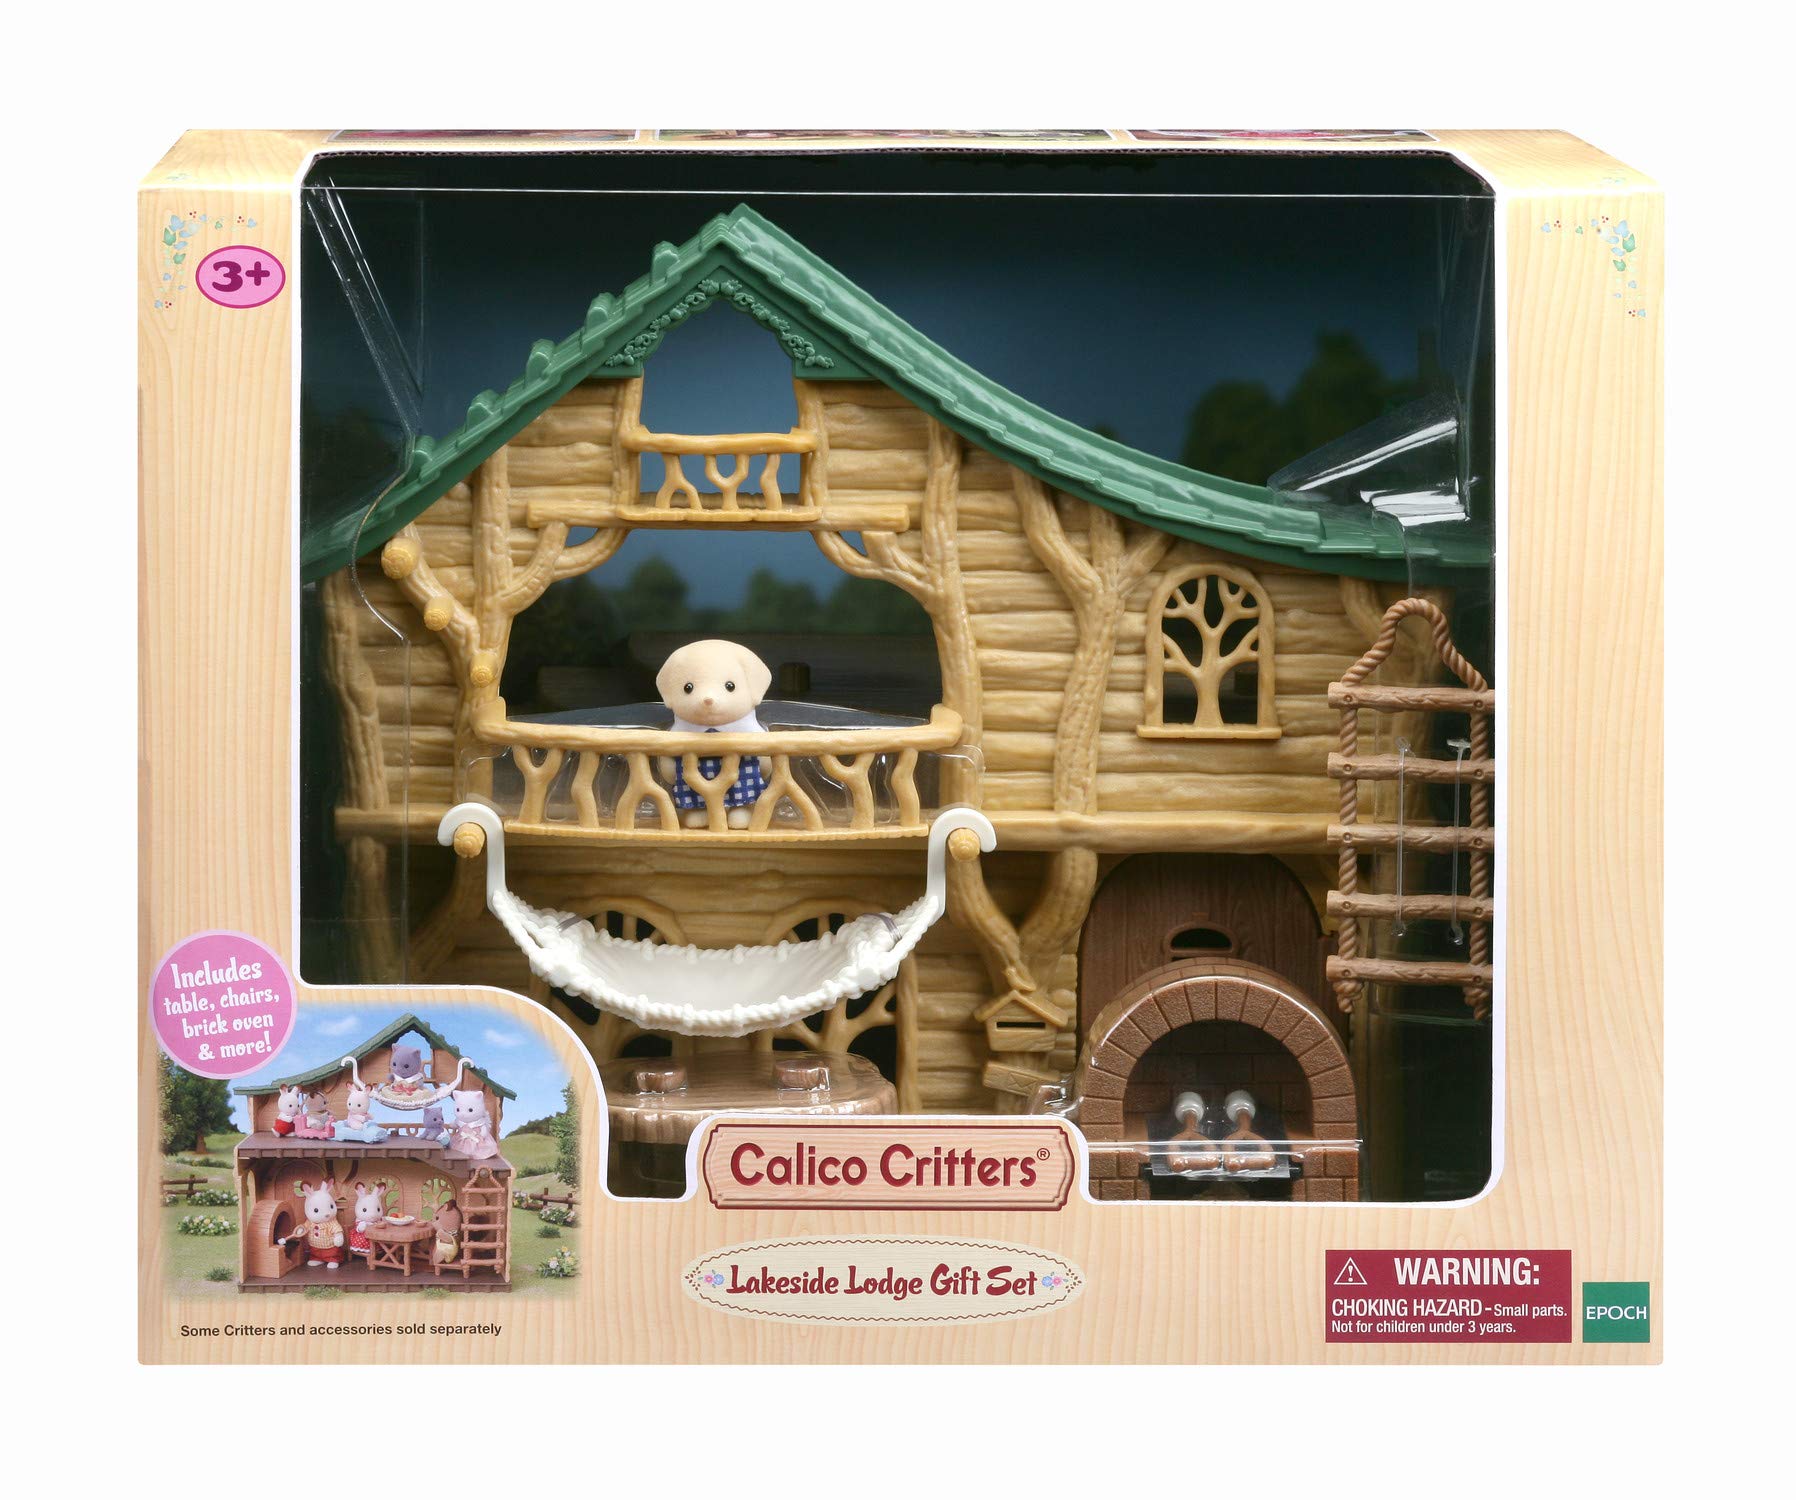 Calico Critters Lakeside Lodge Gift Set, Collectible Dollhouse with Figures, Furniture and Accessories, Pink Medium